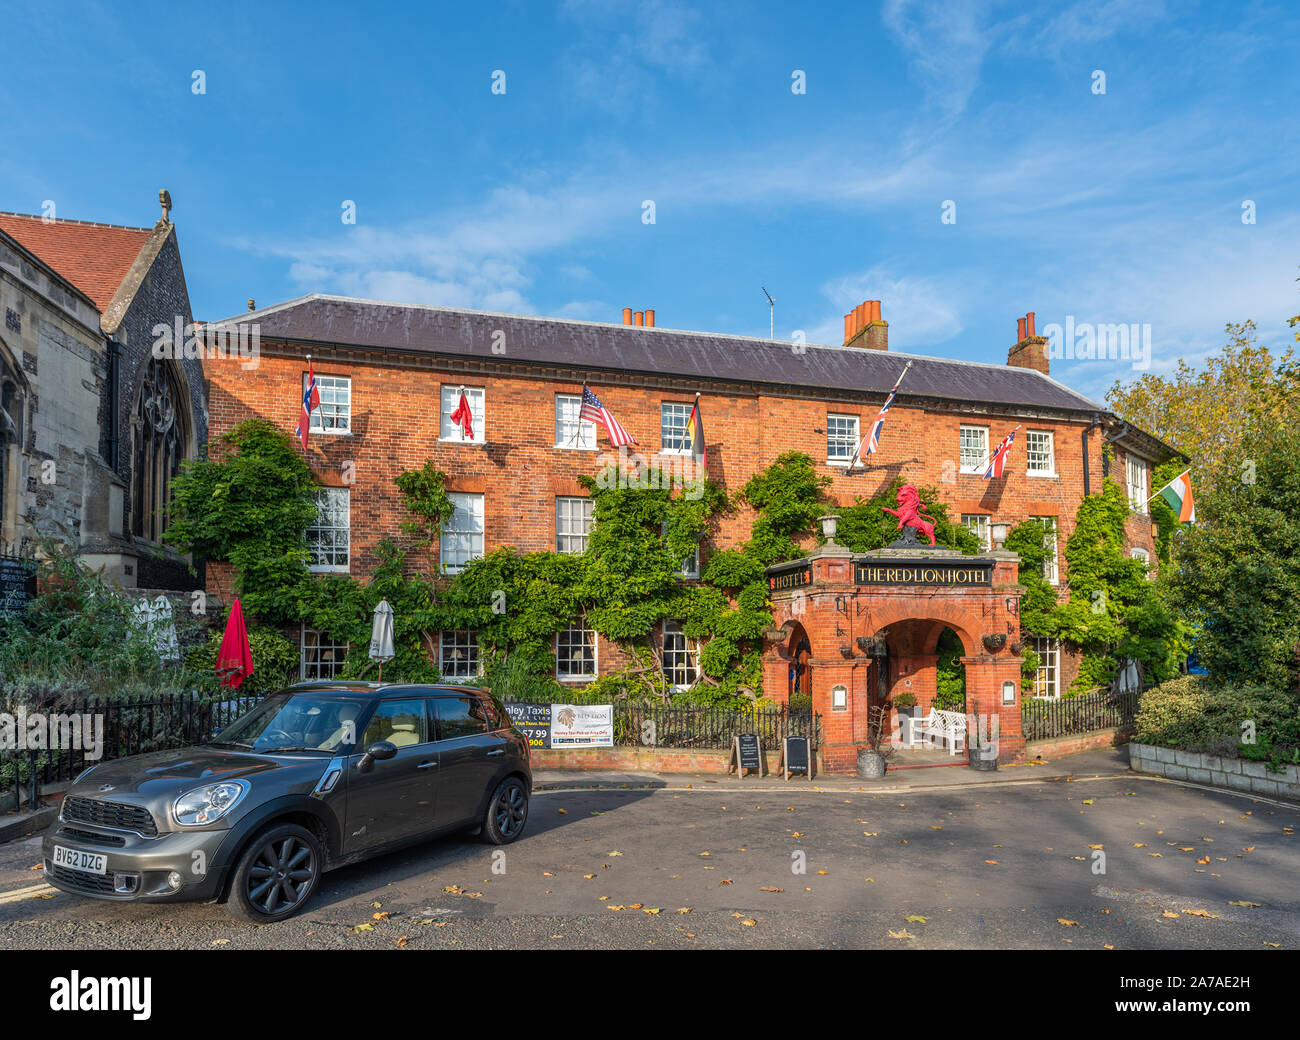 The Red Lion Hotel, Heley-on-Thames, Oxfordshire Stock Photo